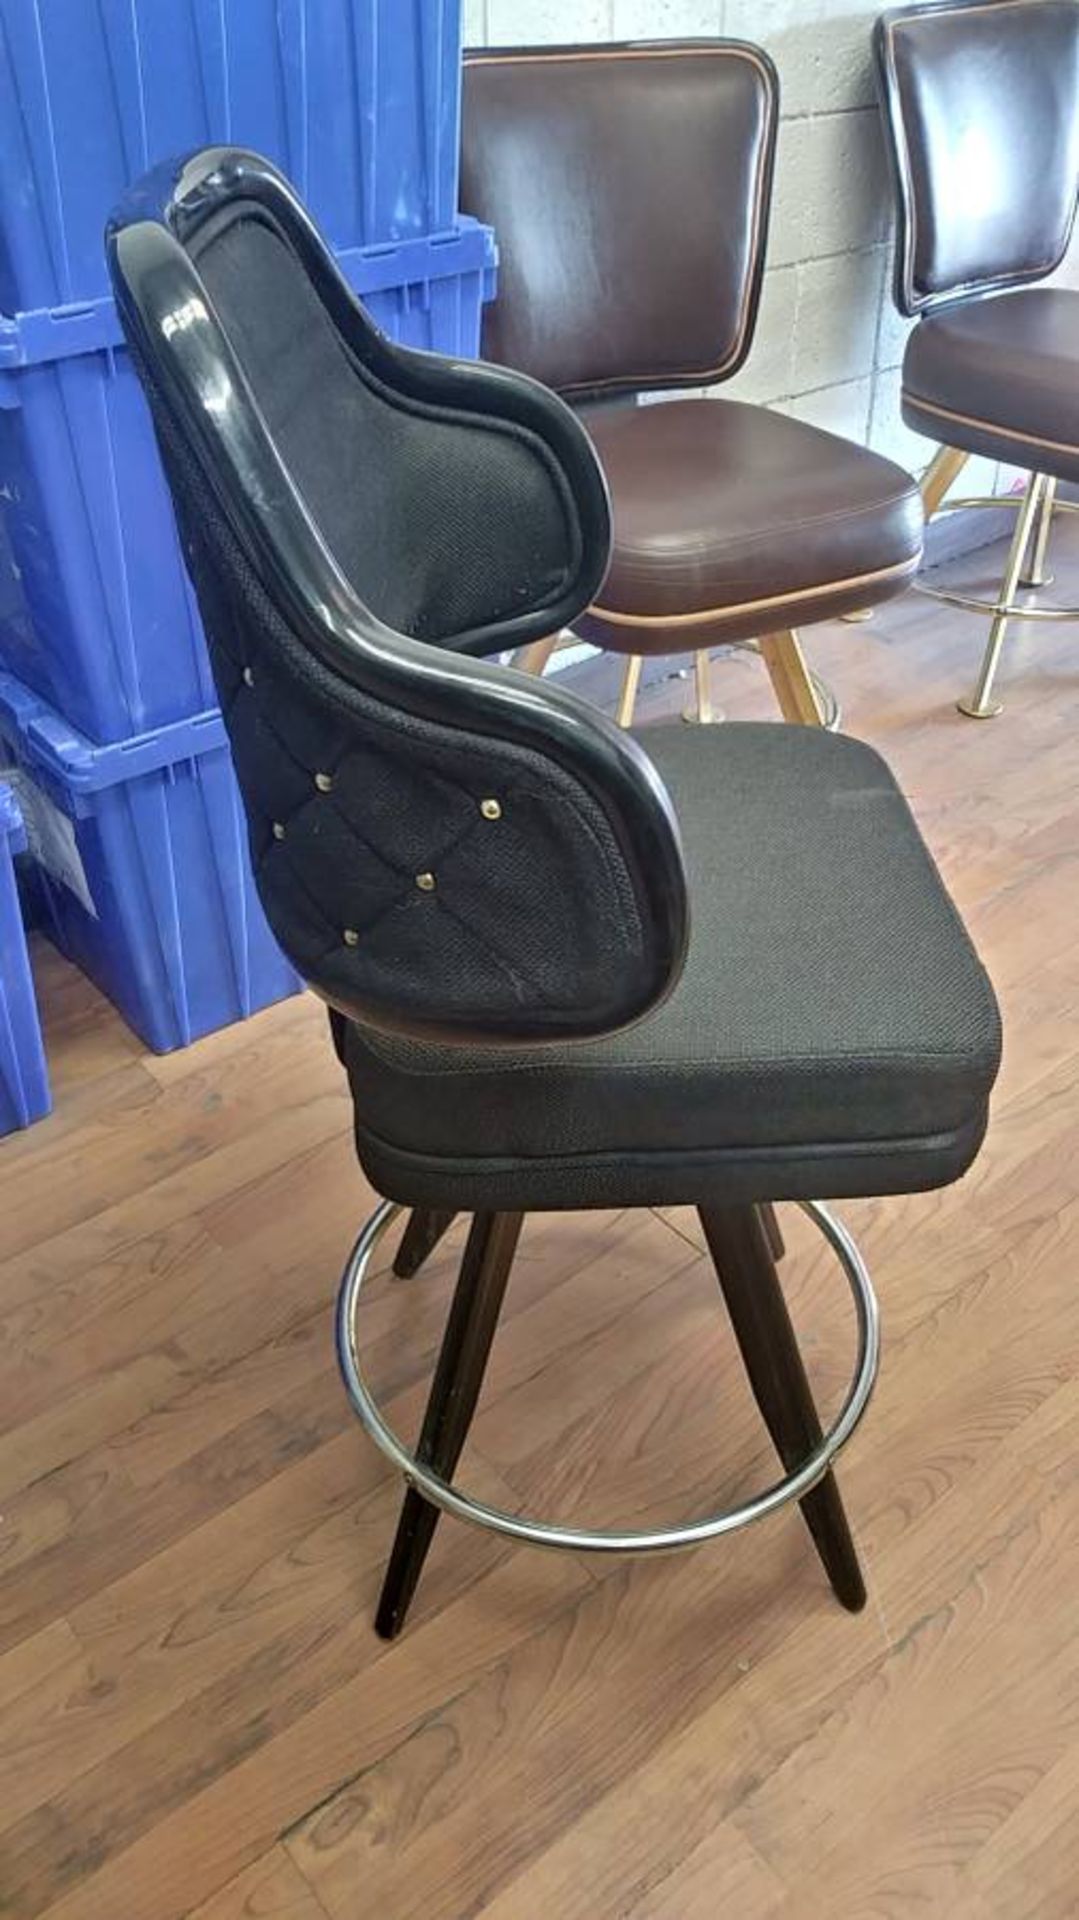 BLACK LOUNGE CHAIRS (SHORT STOOLS) W/ ARM & FOOTREST (X MONEY) (40" TOTAL H X 24" H FROM SEAT..) - Image 3 of 3